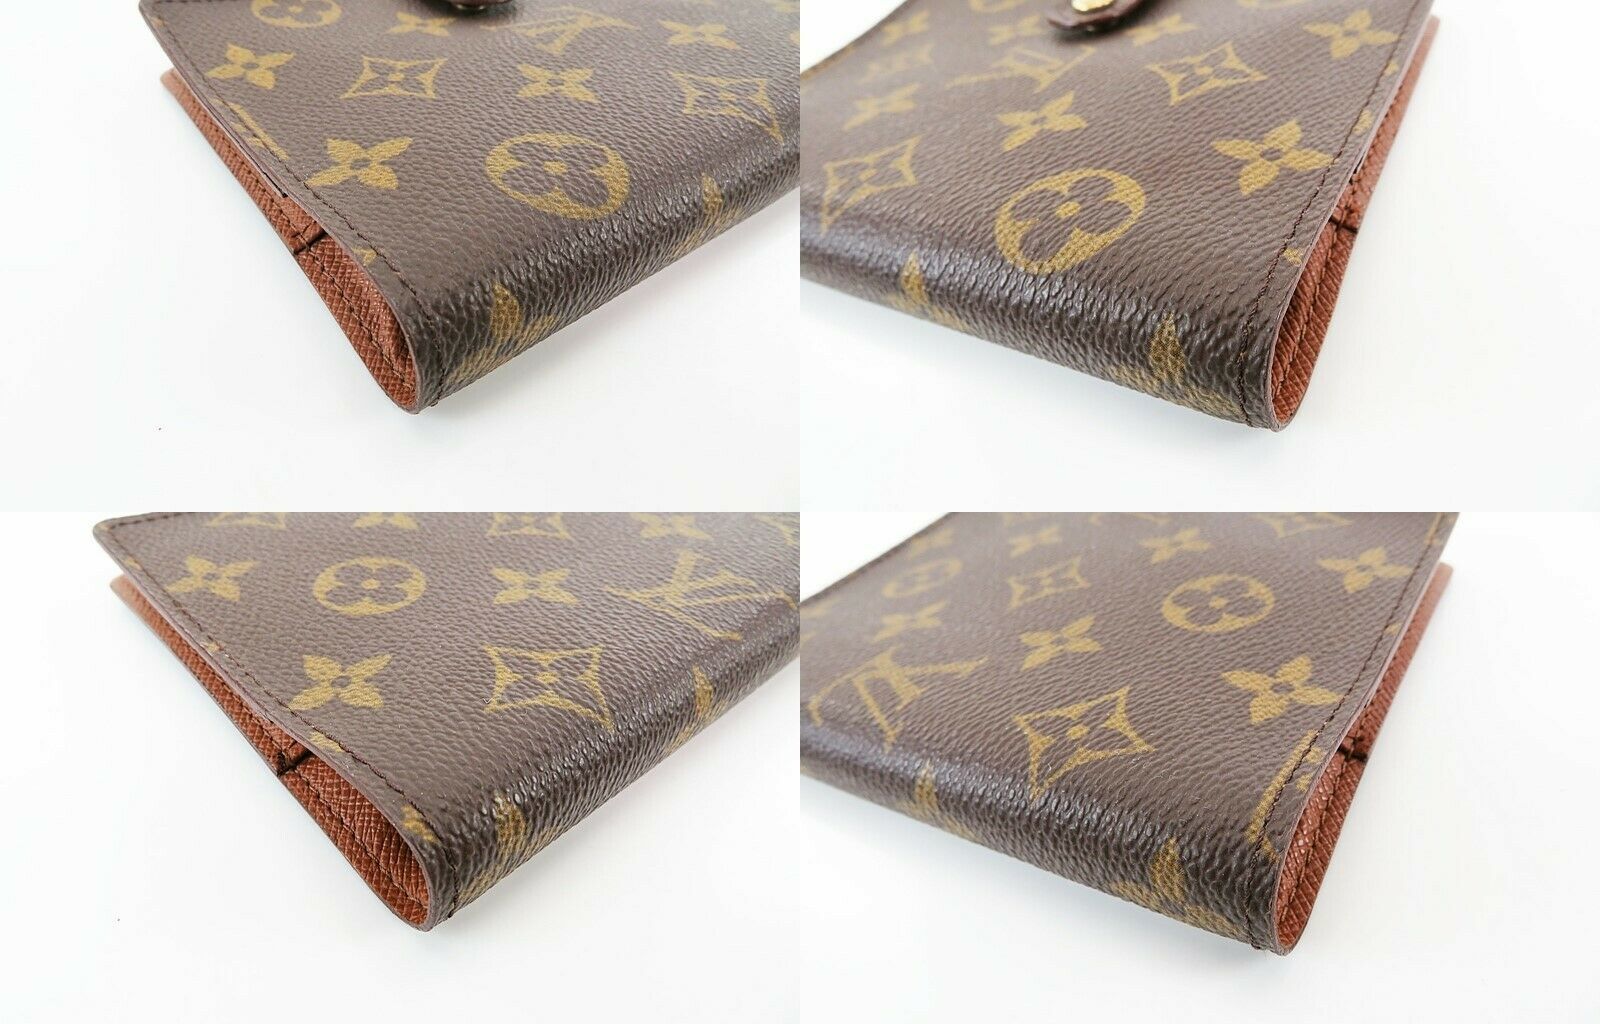 Authentic LOUIS VUITTON Monogram 6 Ring Agenda Address Book Cover #729A - Organizers, Planners